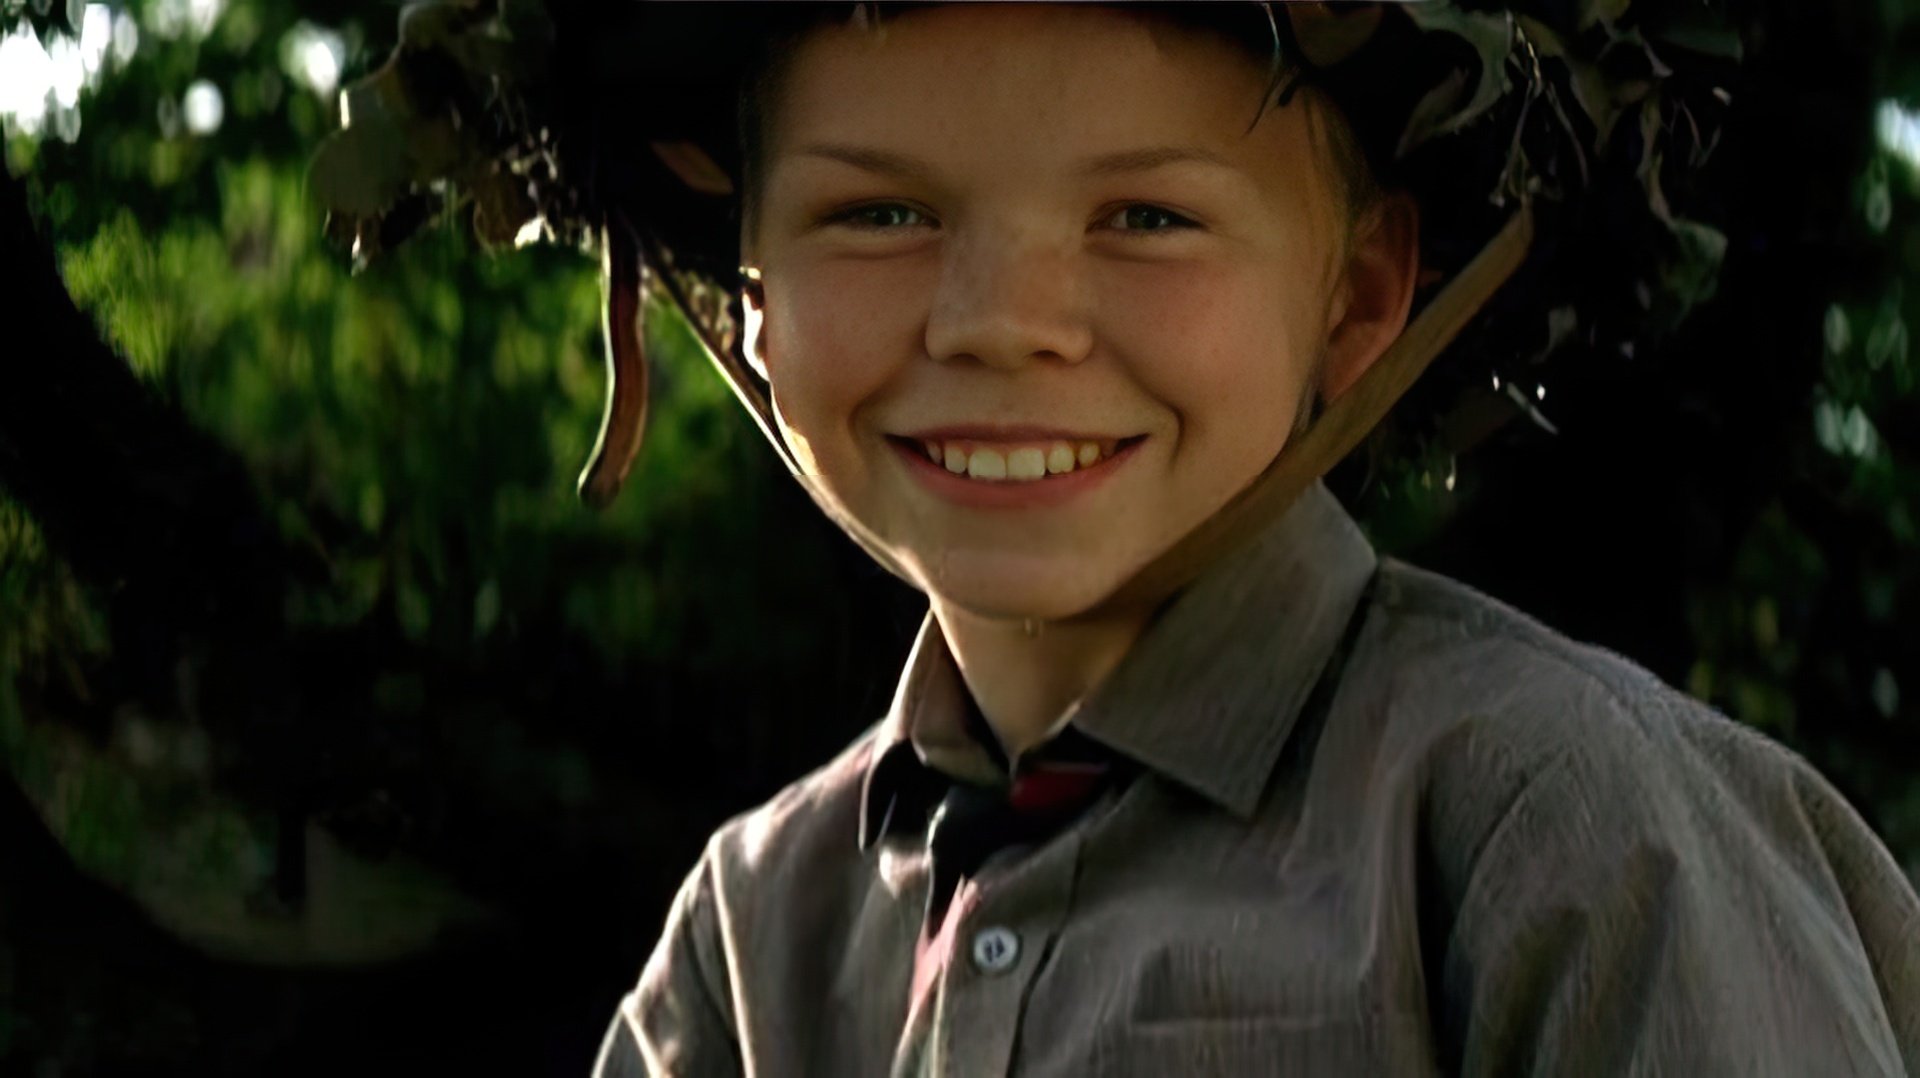 Will Poulter in his childhood